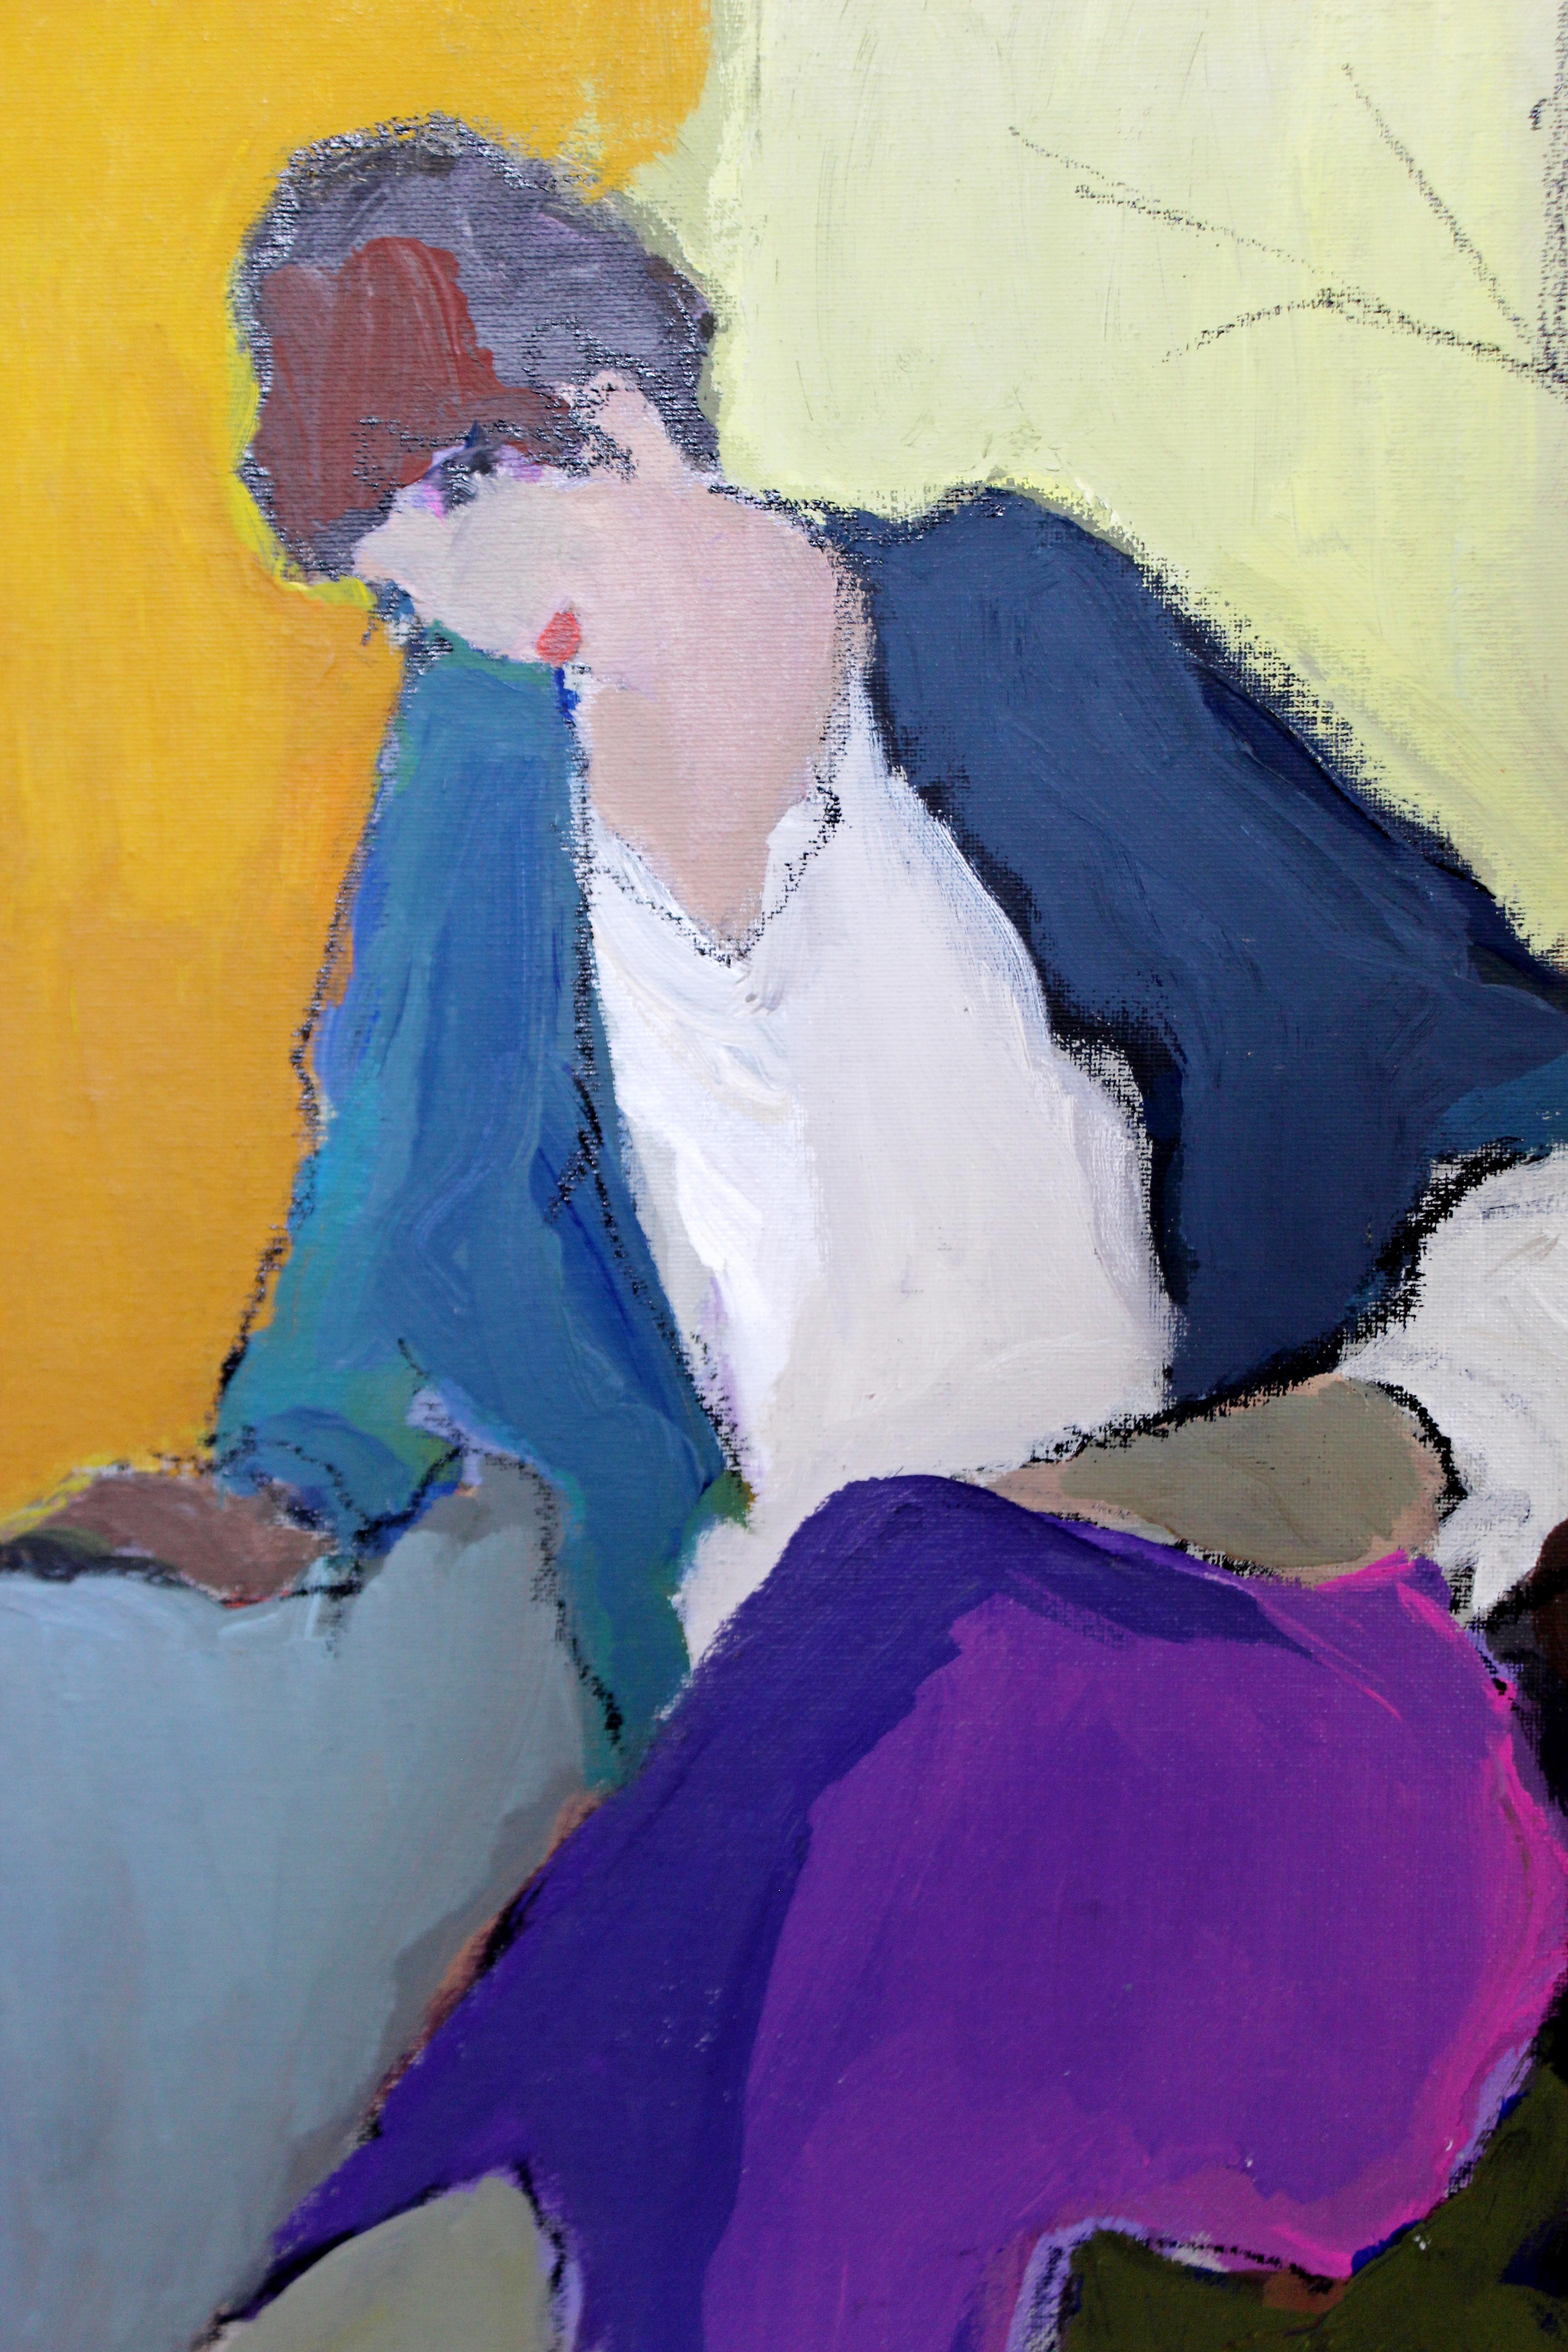 Late 20th Century Mid-Century Modern Tarkay Framed Orig Acrylic Painting Women N Purple in Thought